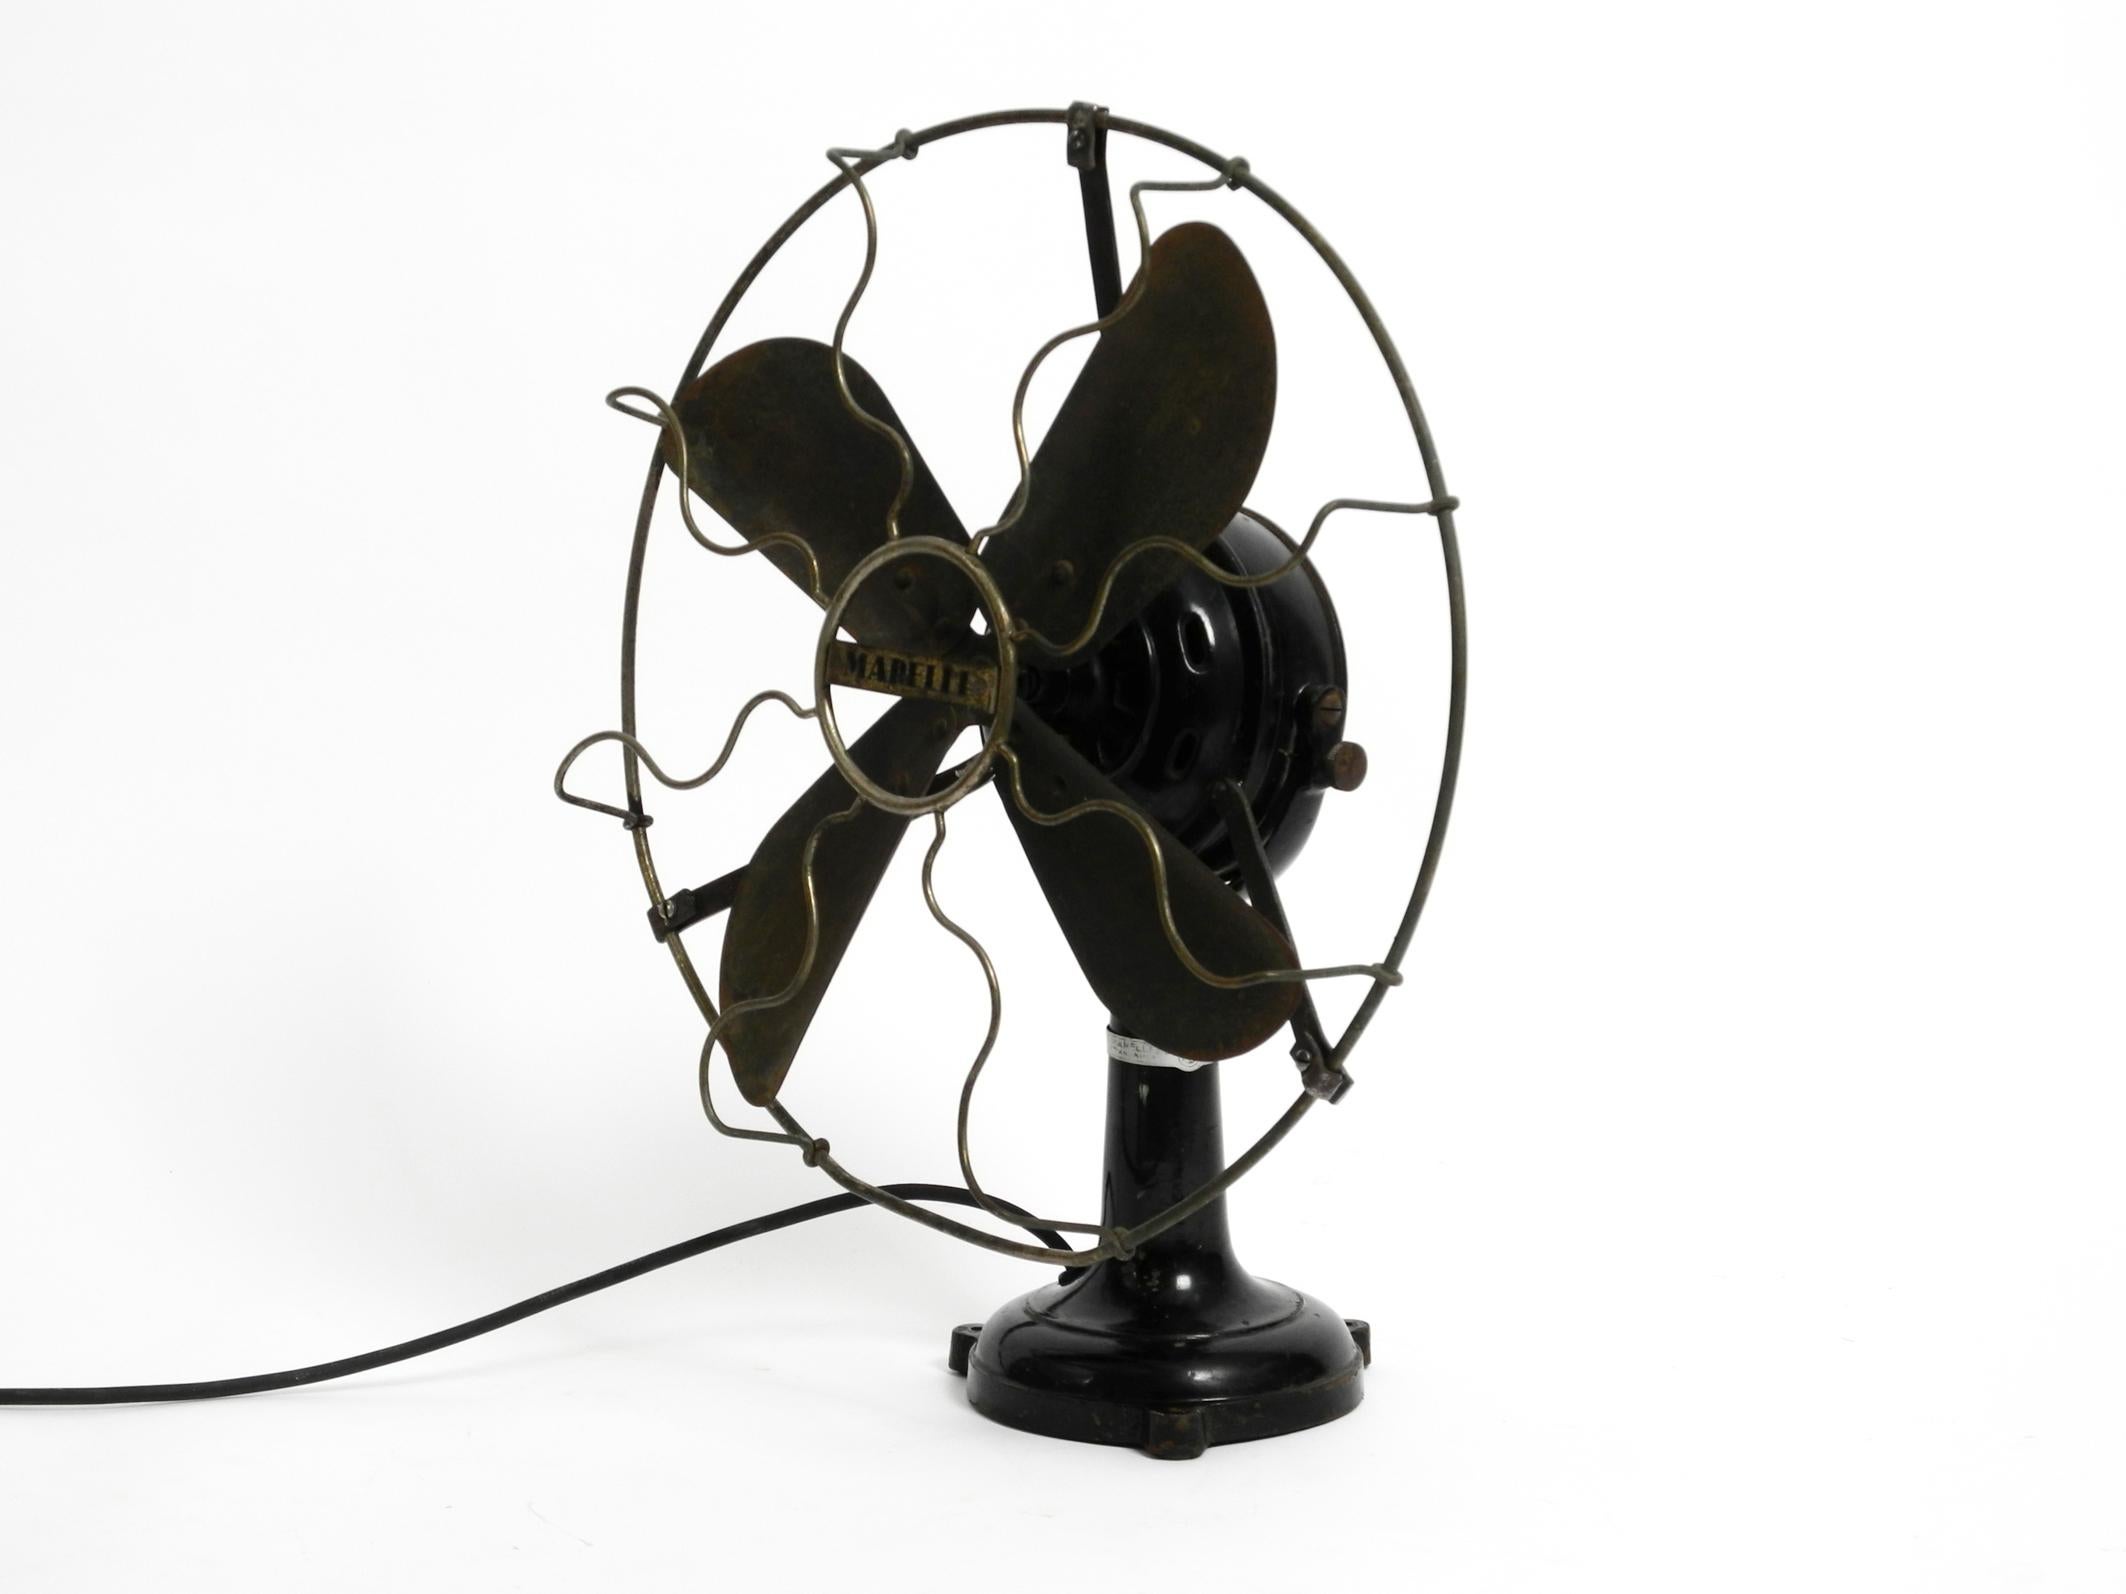 Huge Heavy Original 1930s Industrial Metal Table Fan by Marelli Made in Italy 9